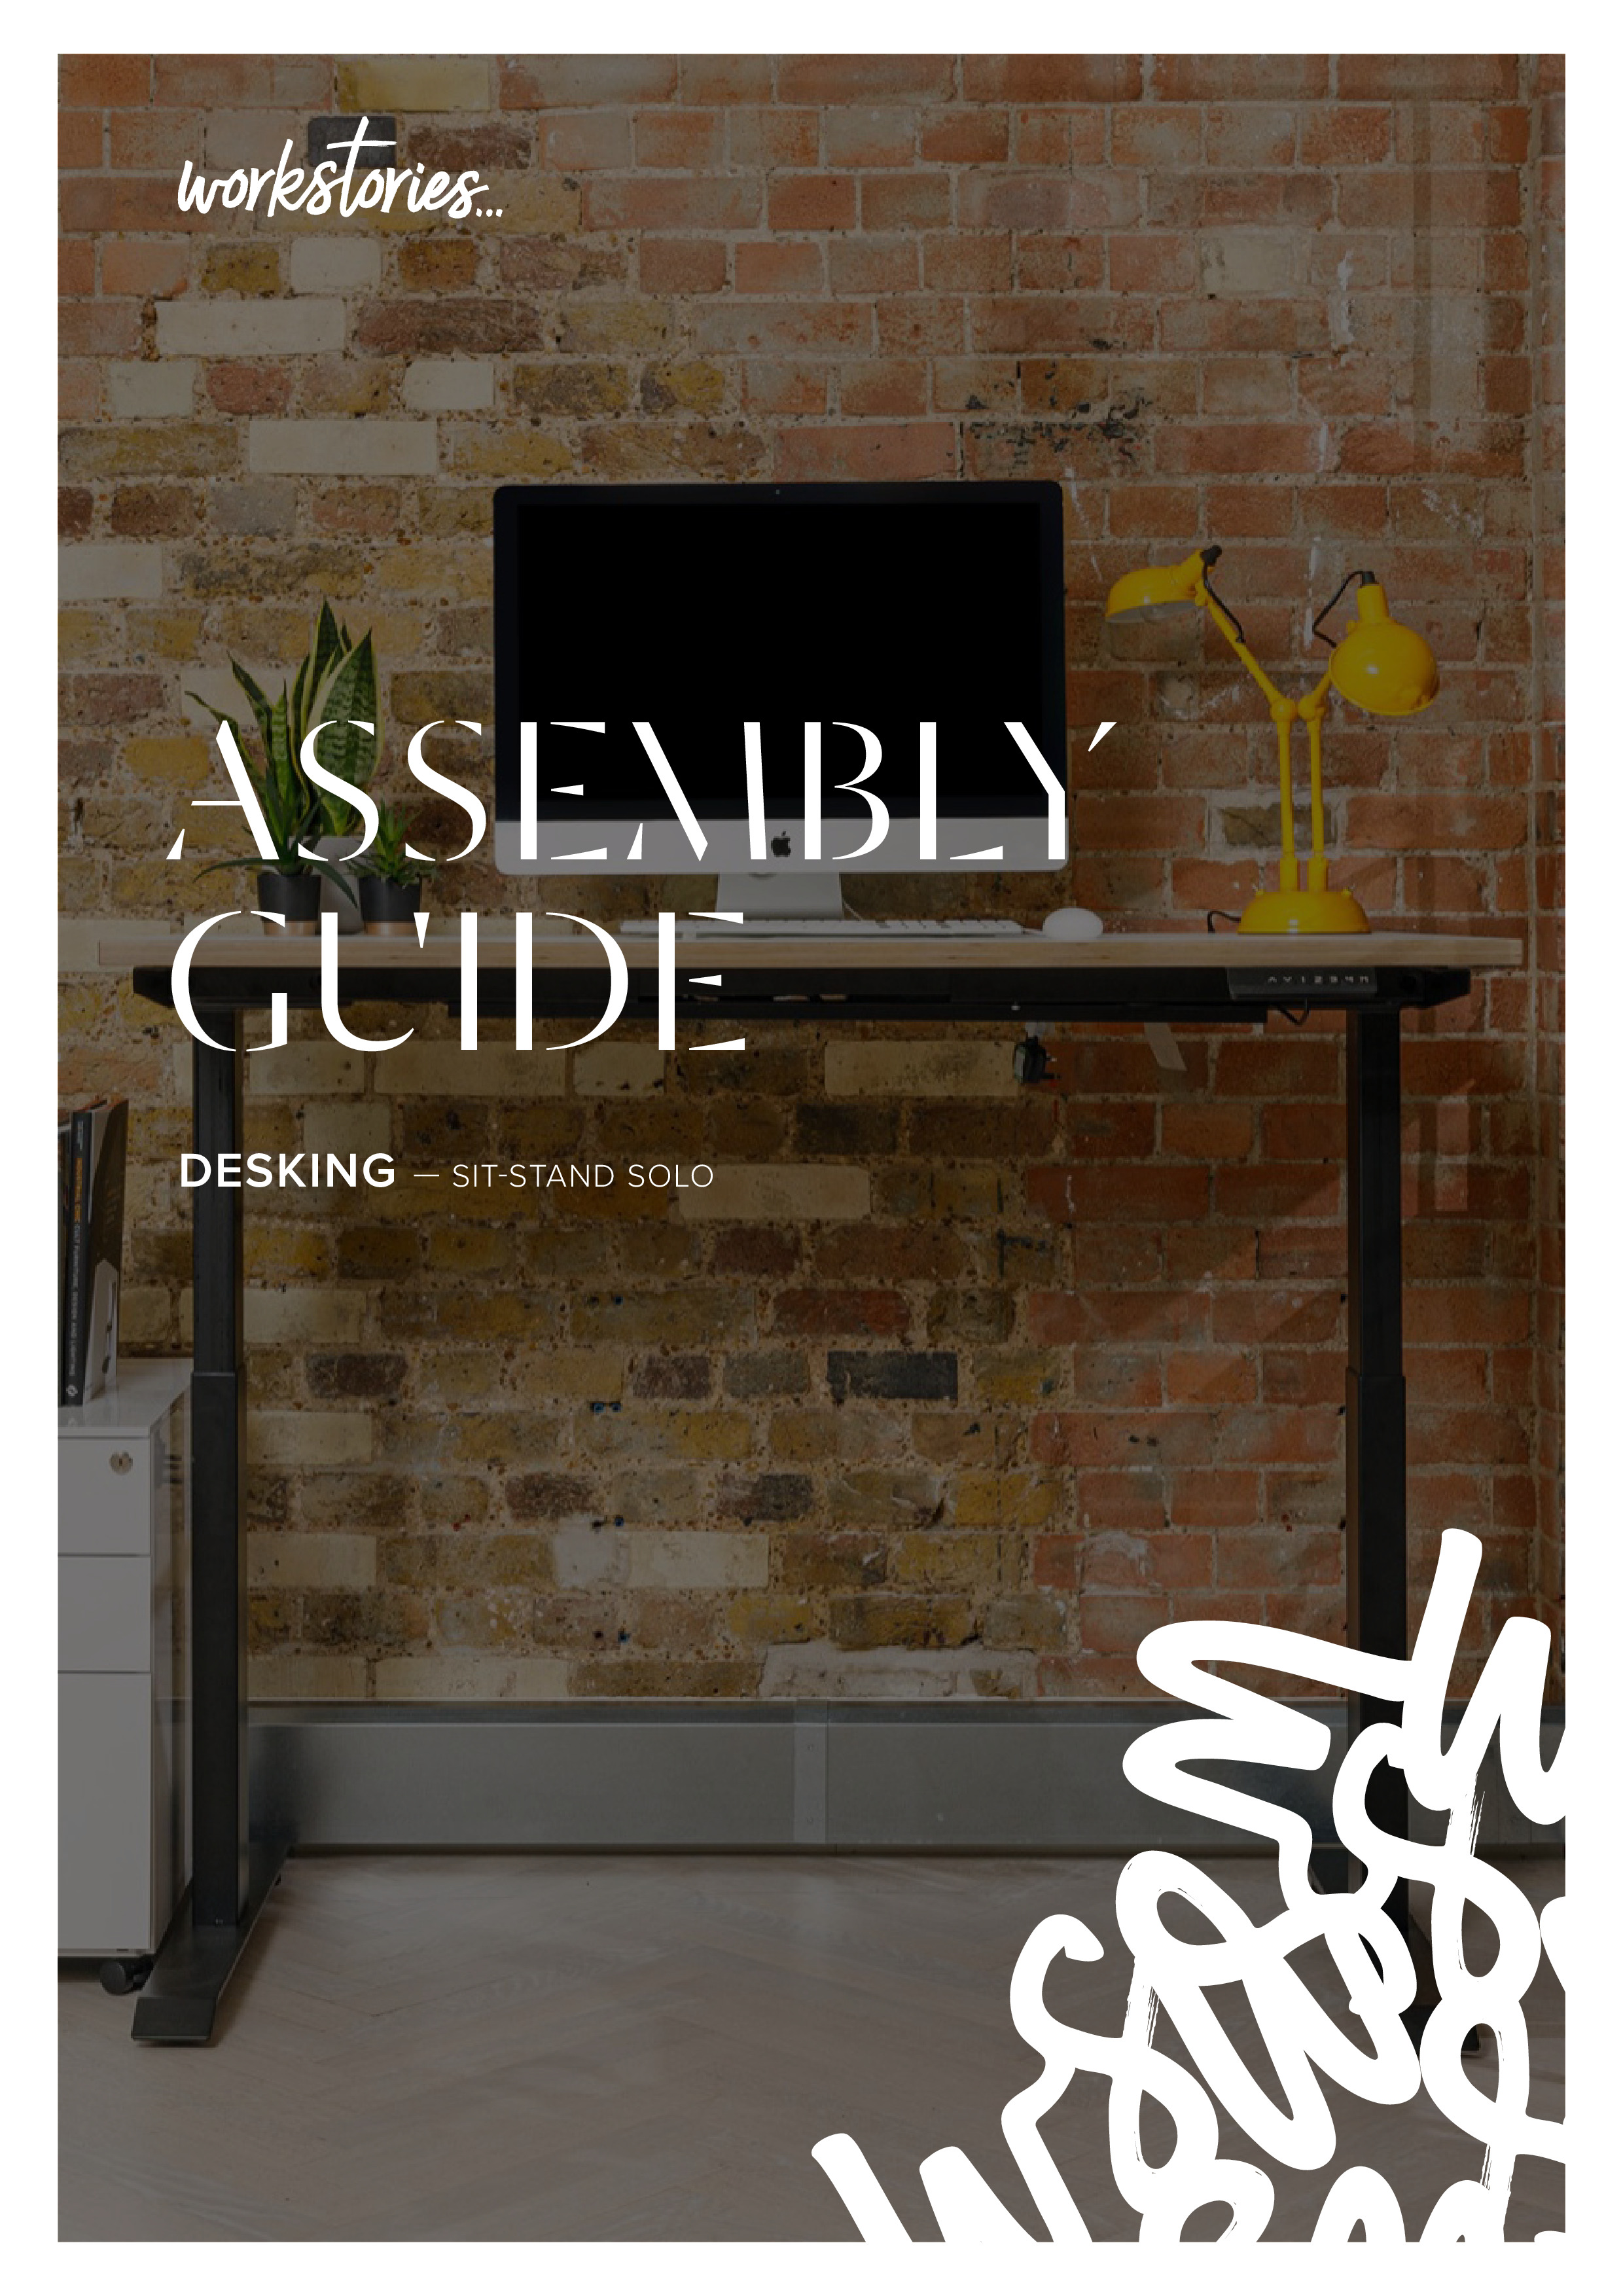 WS - ASSEMBLY GUIDE - Desking - Sit-Stand Solo